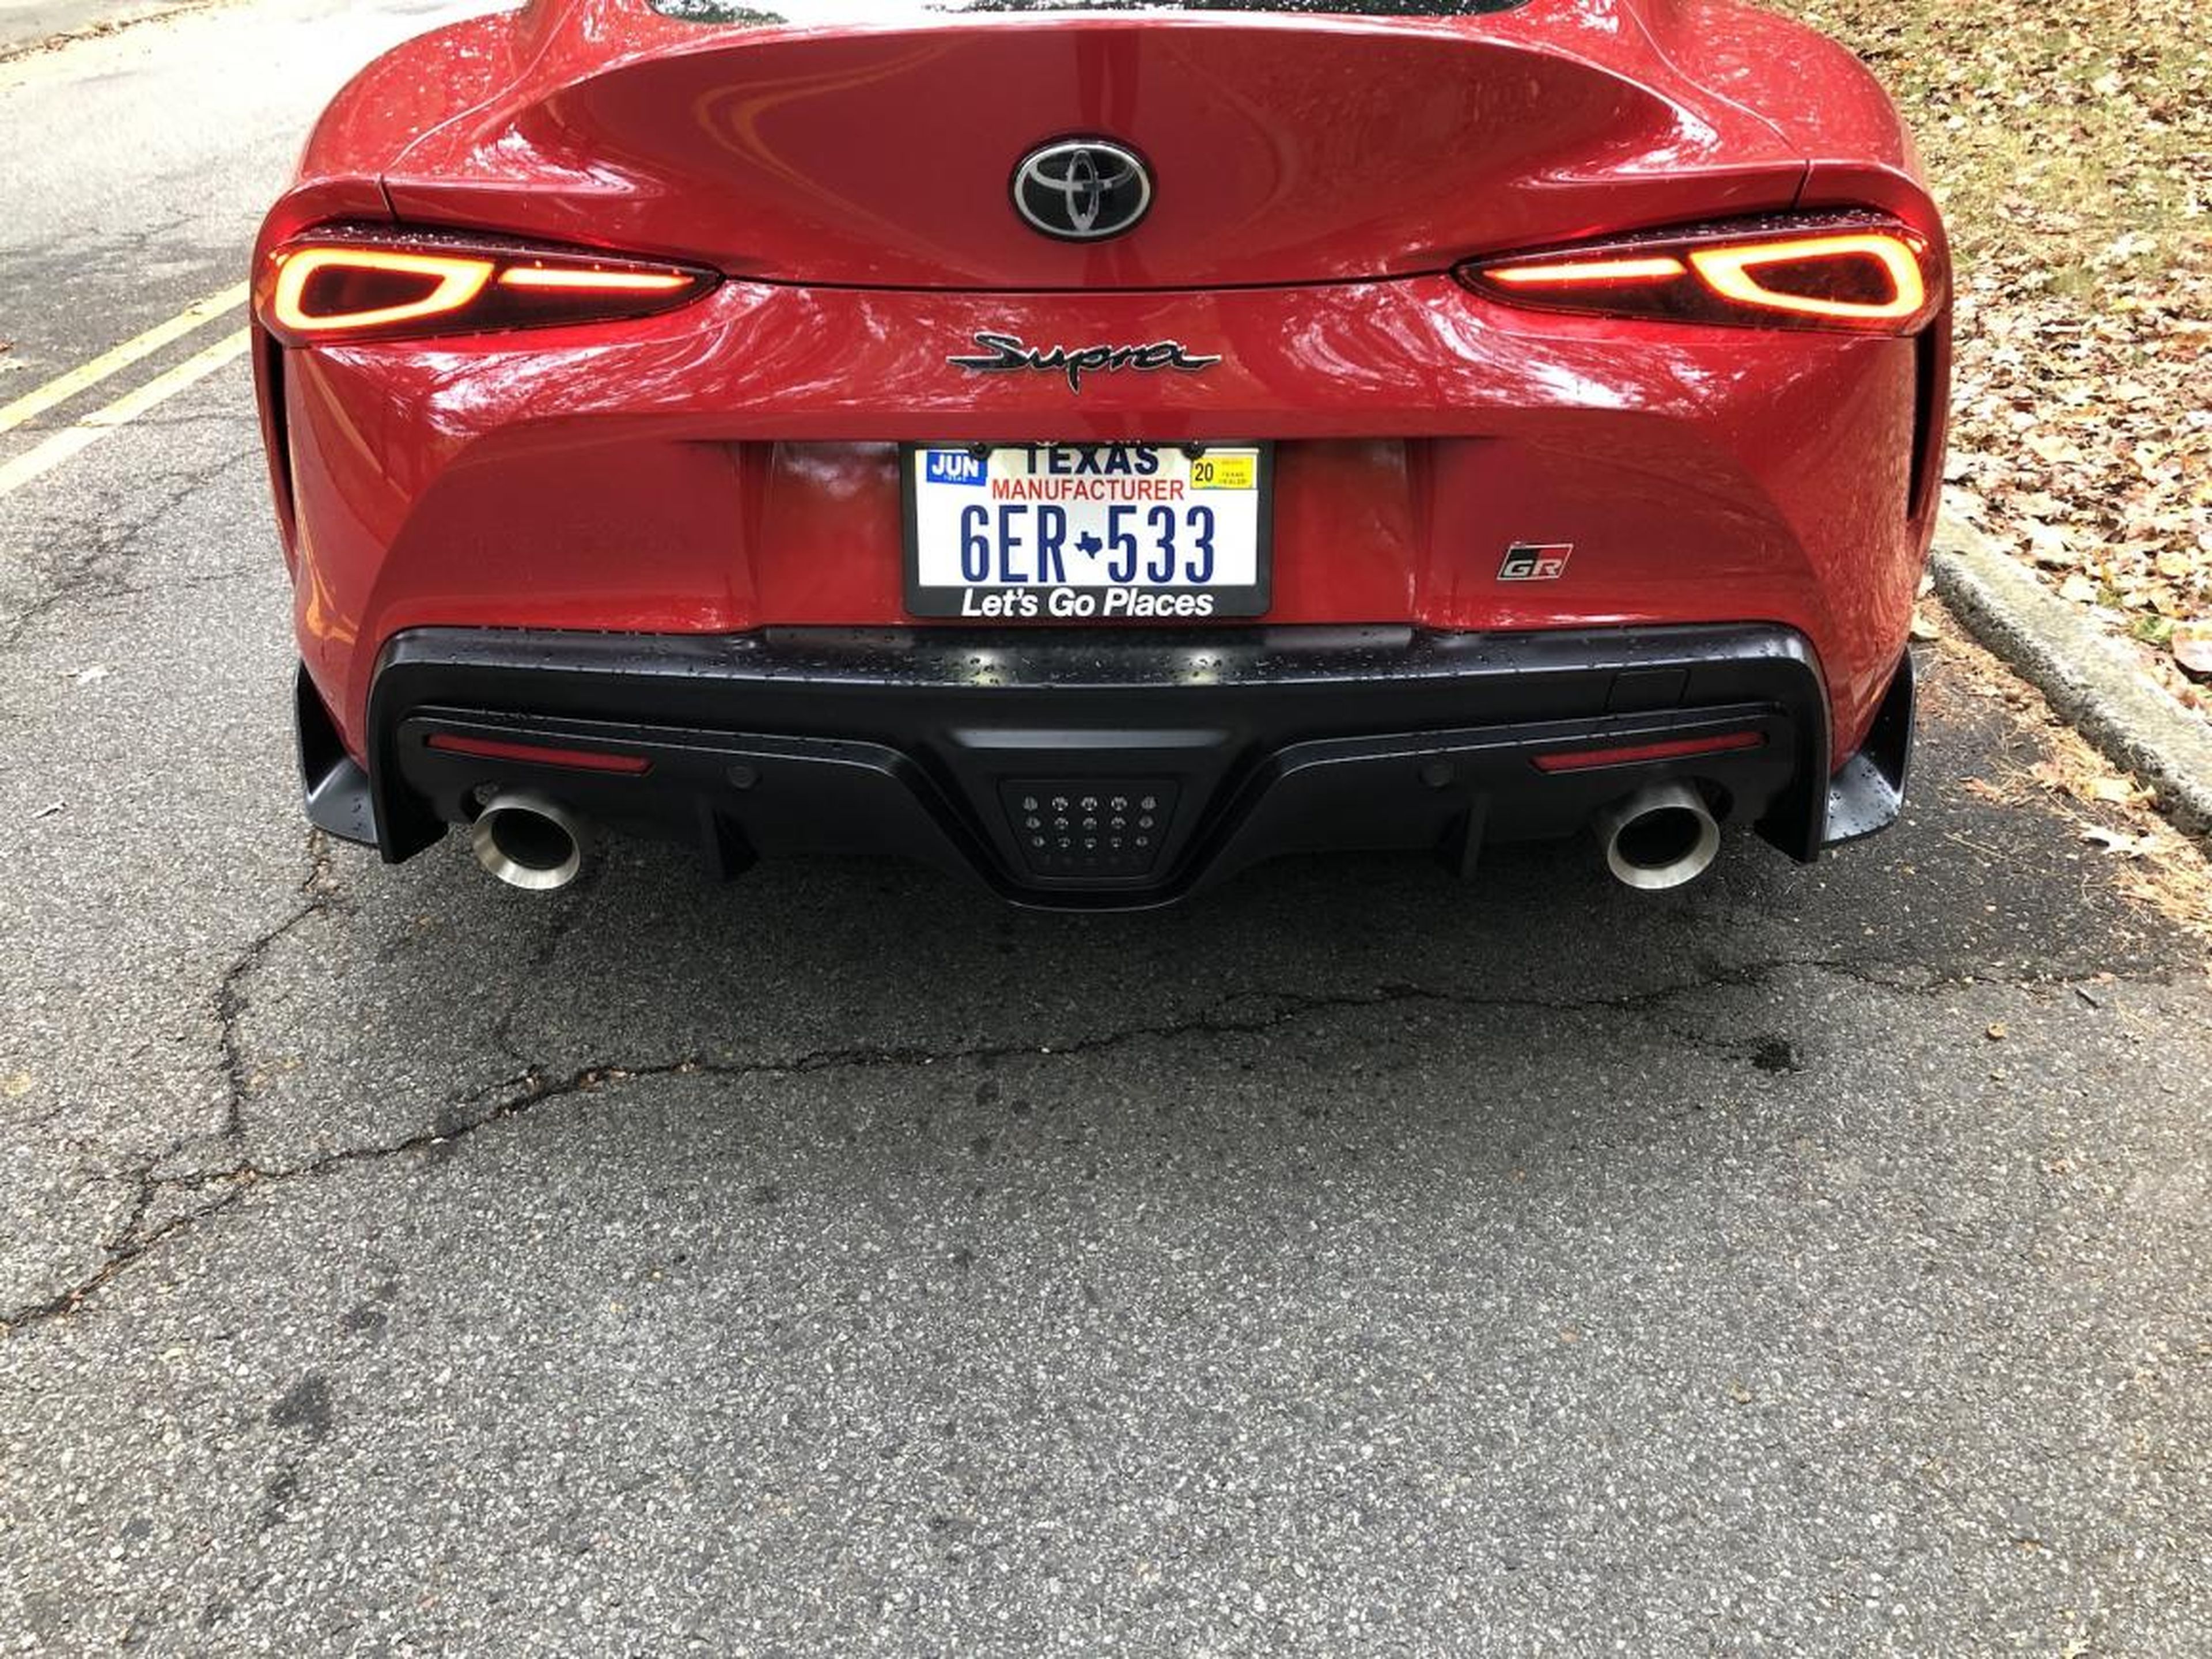 Dual exhaust pipes are a clue that this car has some serious giddy-up. There's also a modest rear diffuser.